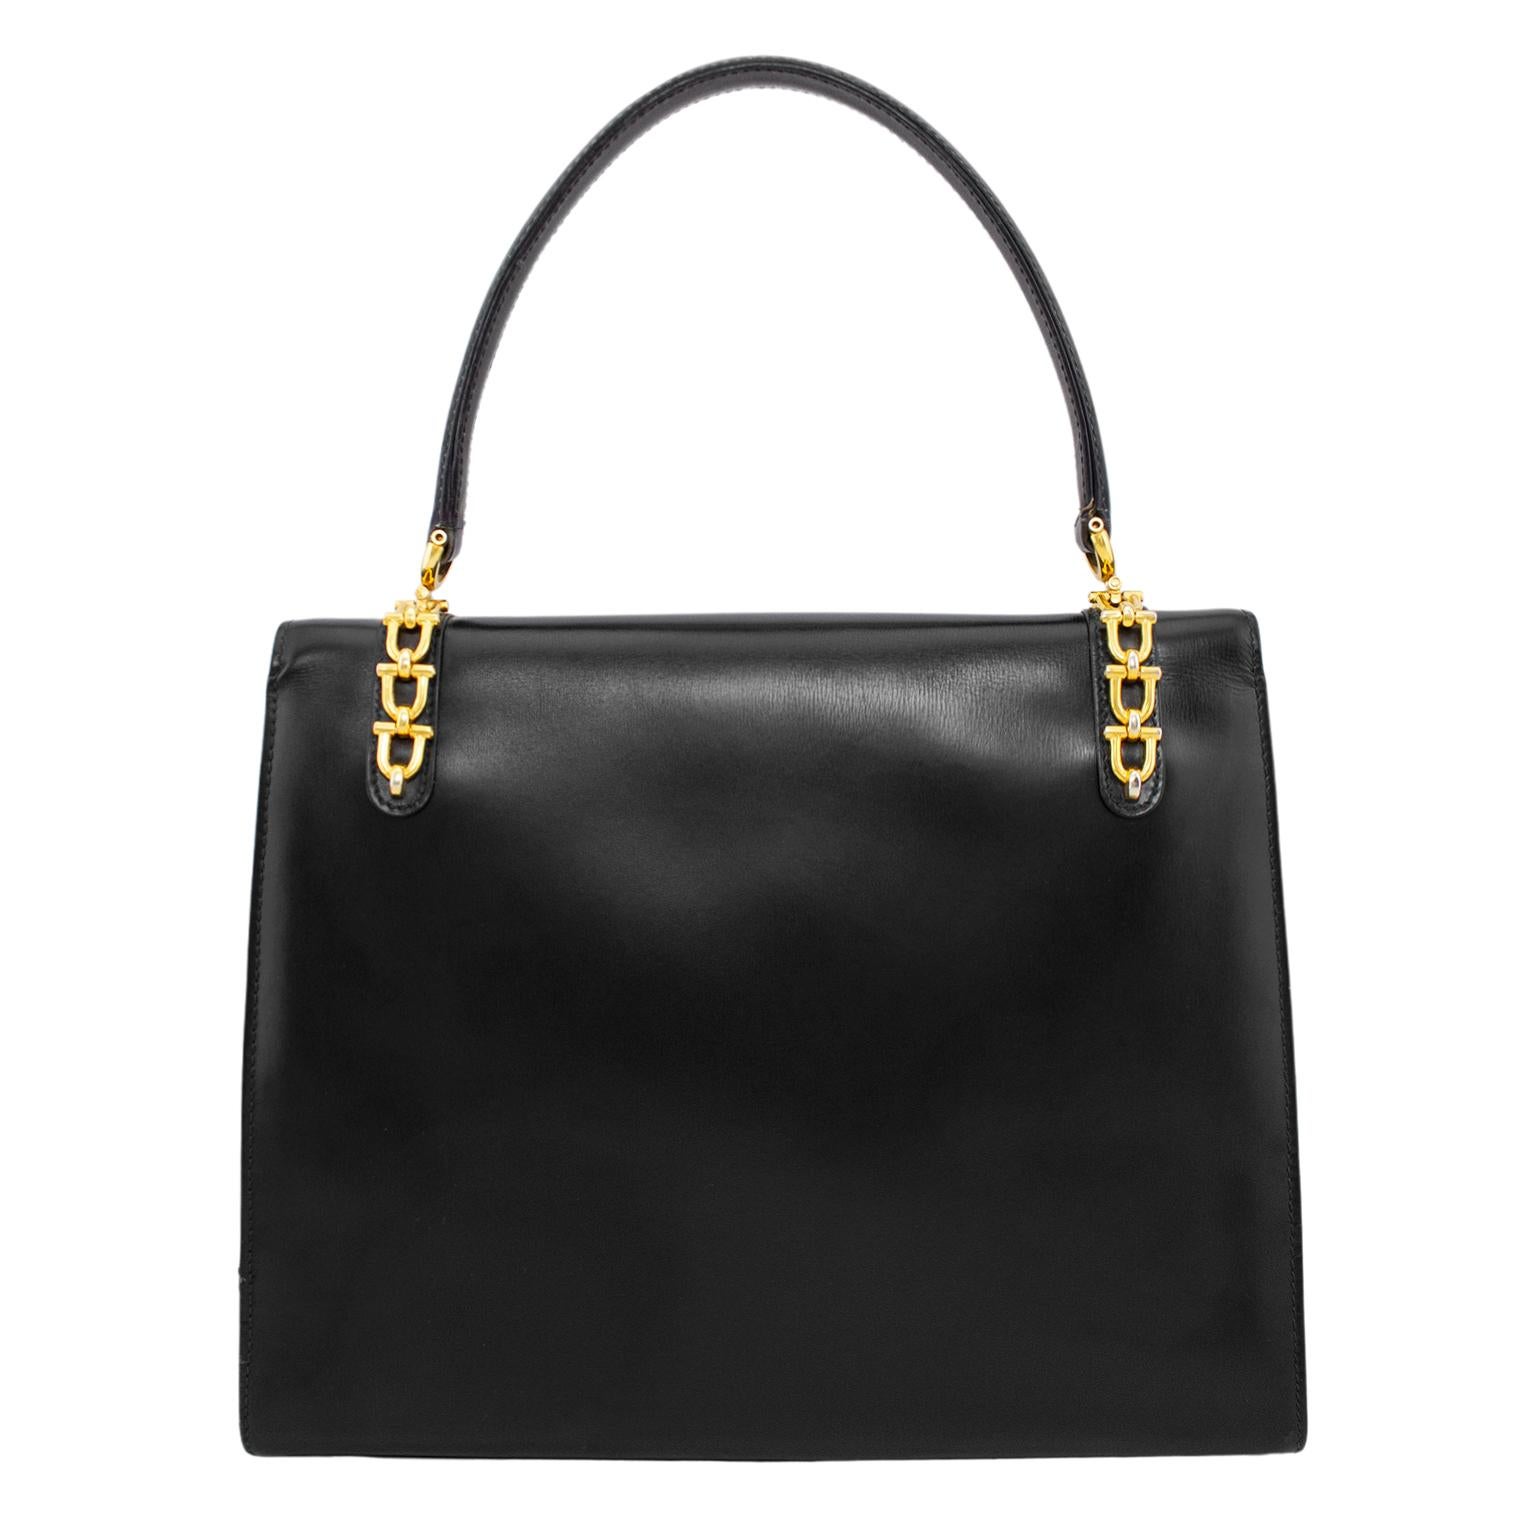 1970s Gucci Black Supple Leather Top Handle Bag with Gold Bit Details  In Good Condition In Toronto, Ontario